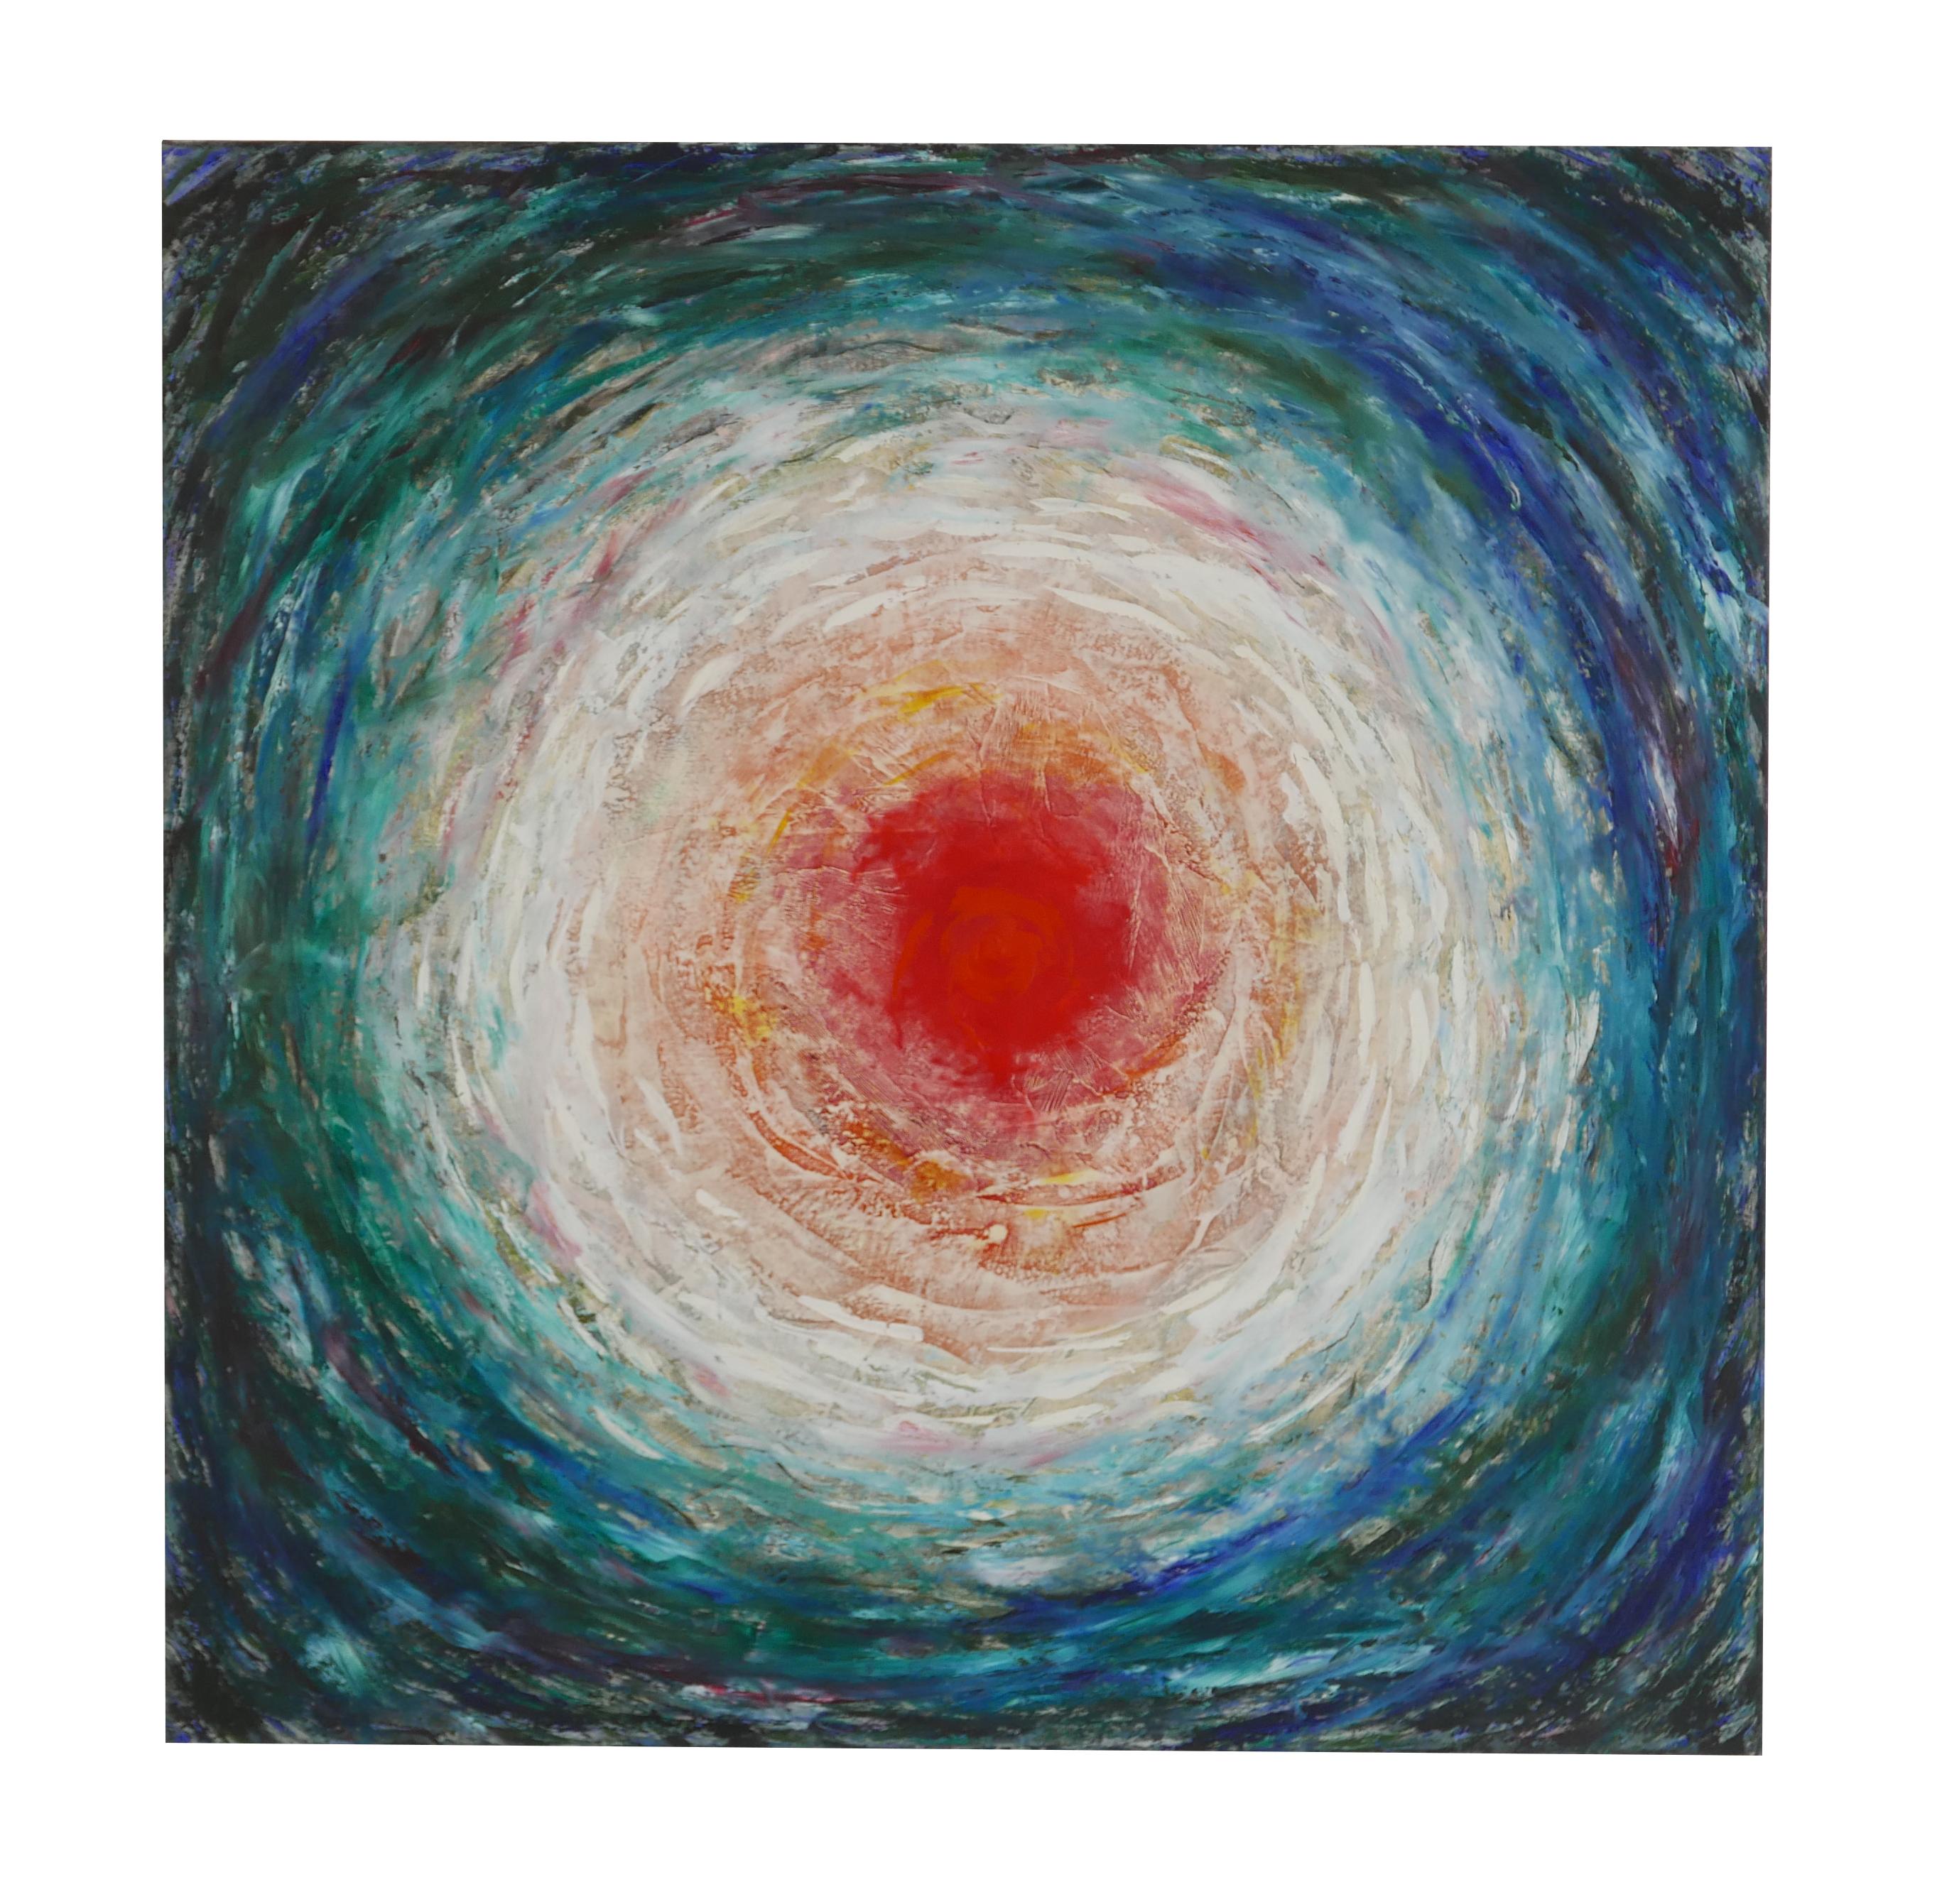 Emotion - painting, abstract, contemporary, blue, red, circular, vibrant, square - Painting by Gogi Gelantia